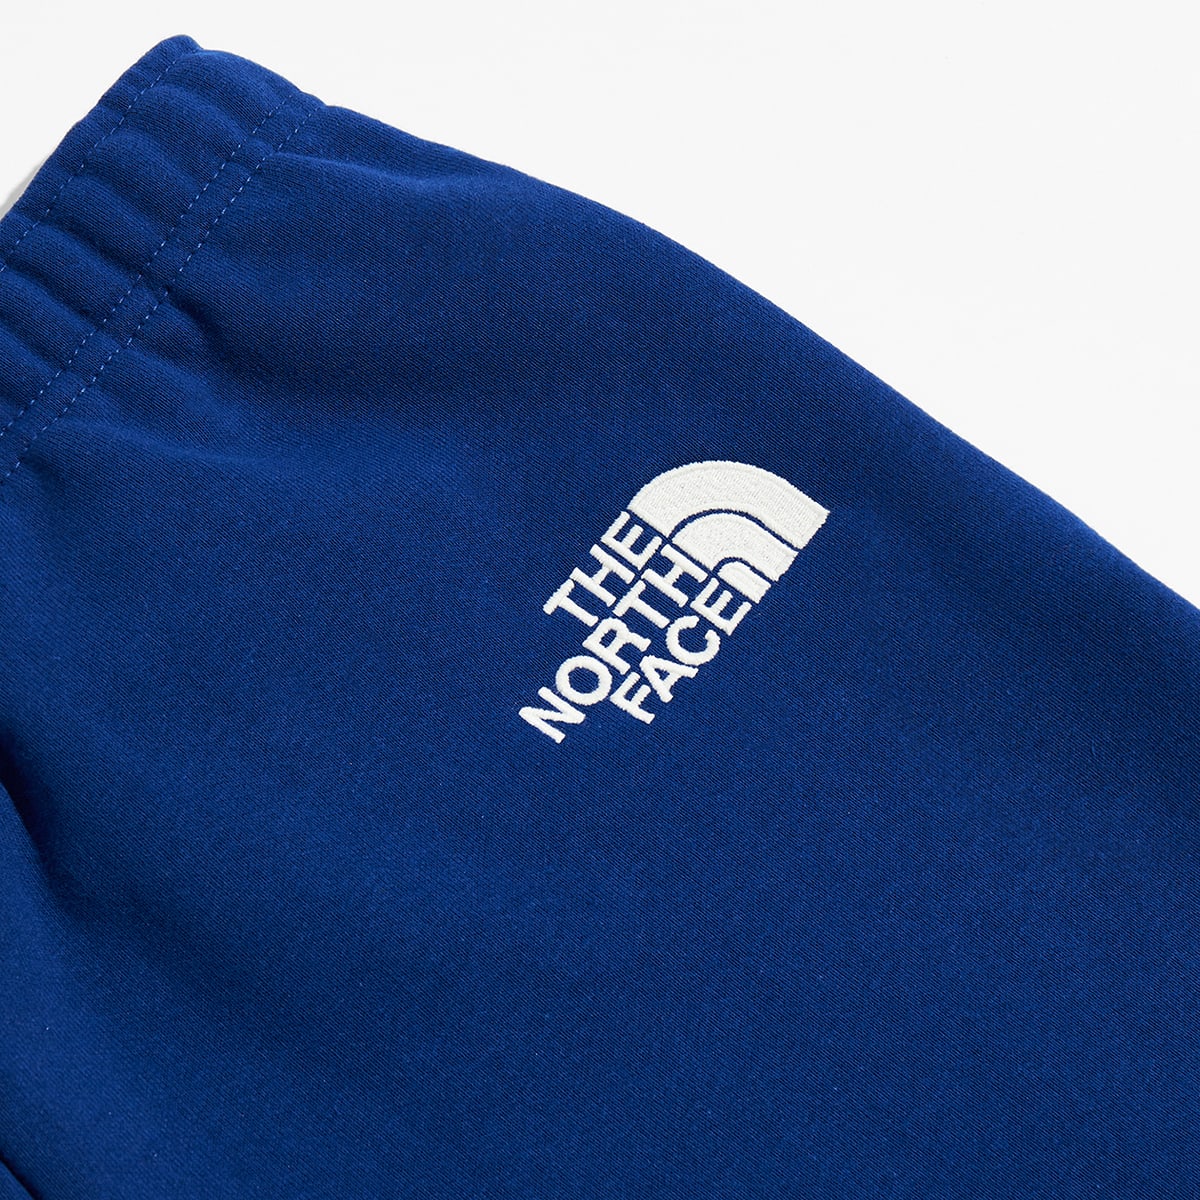 The North Face XX KAWS Sweat Pant (Bolt Blue) | END. Launches